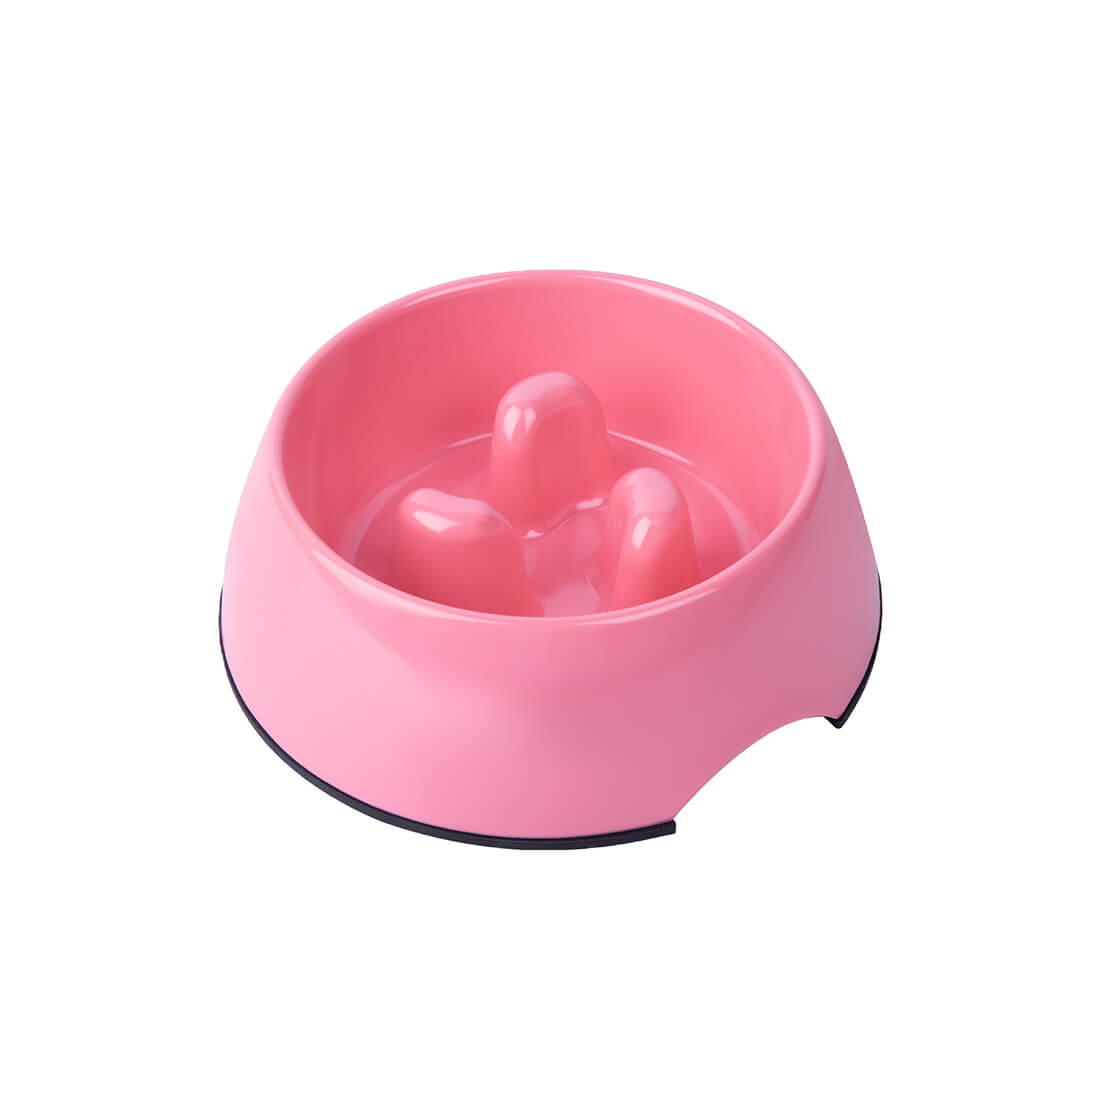 Pet Supplies : DPOEGTS Slow Feeder Dog Bowl, Puzzle Dog Food Bowl  Anti-Gulping Interactive Dog Bowl and Water Dog Bowl for Small/Medium Sized  Dogs (Pink New, Bone) 